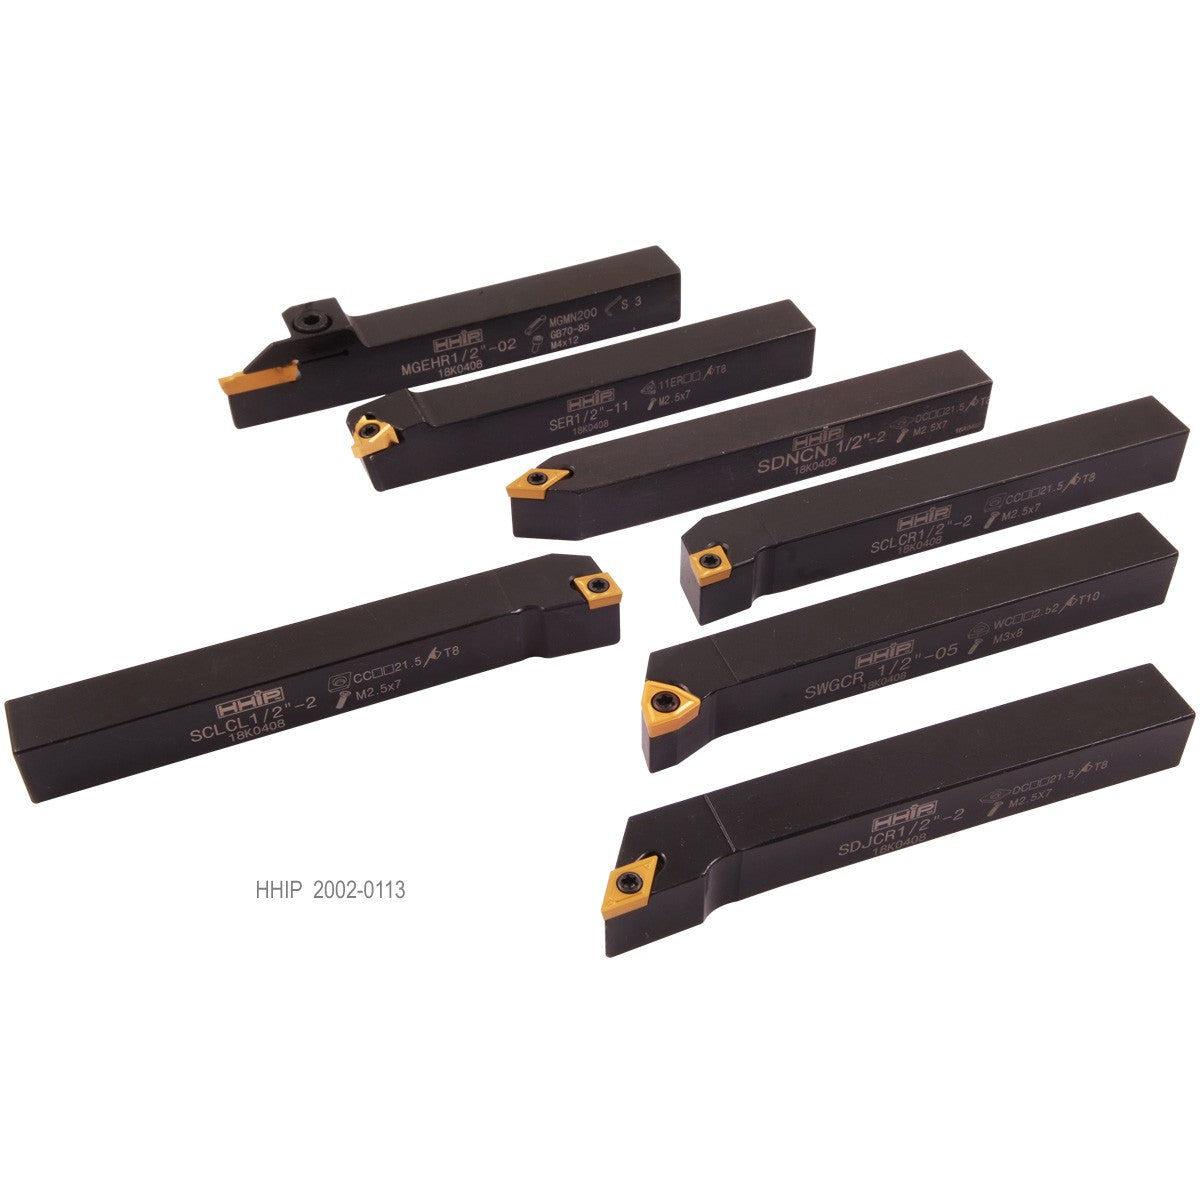 PRO-SERIES 7 PIECE 1/2 INDEXABLE CUT OFF & TURNING TOOL SET